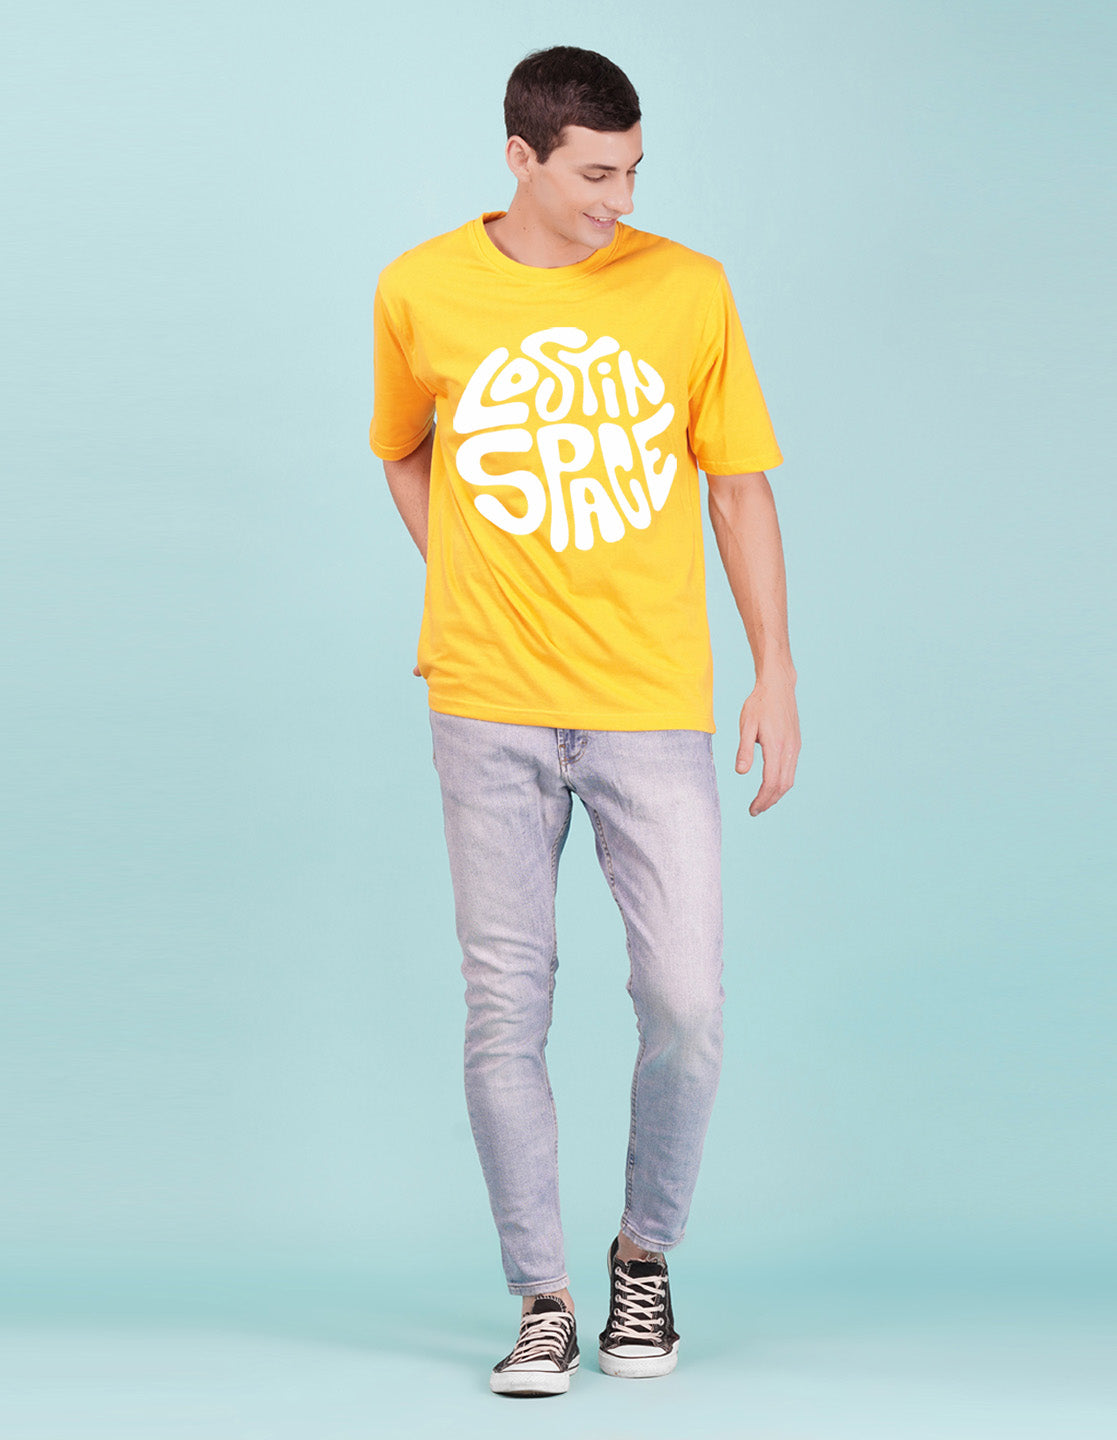 Nusyl Yellow Lost in space Printed oversized t-shirt